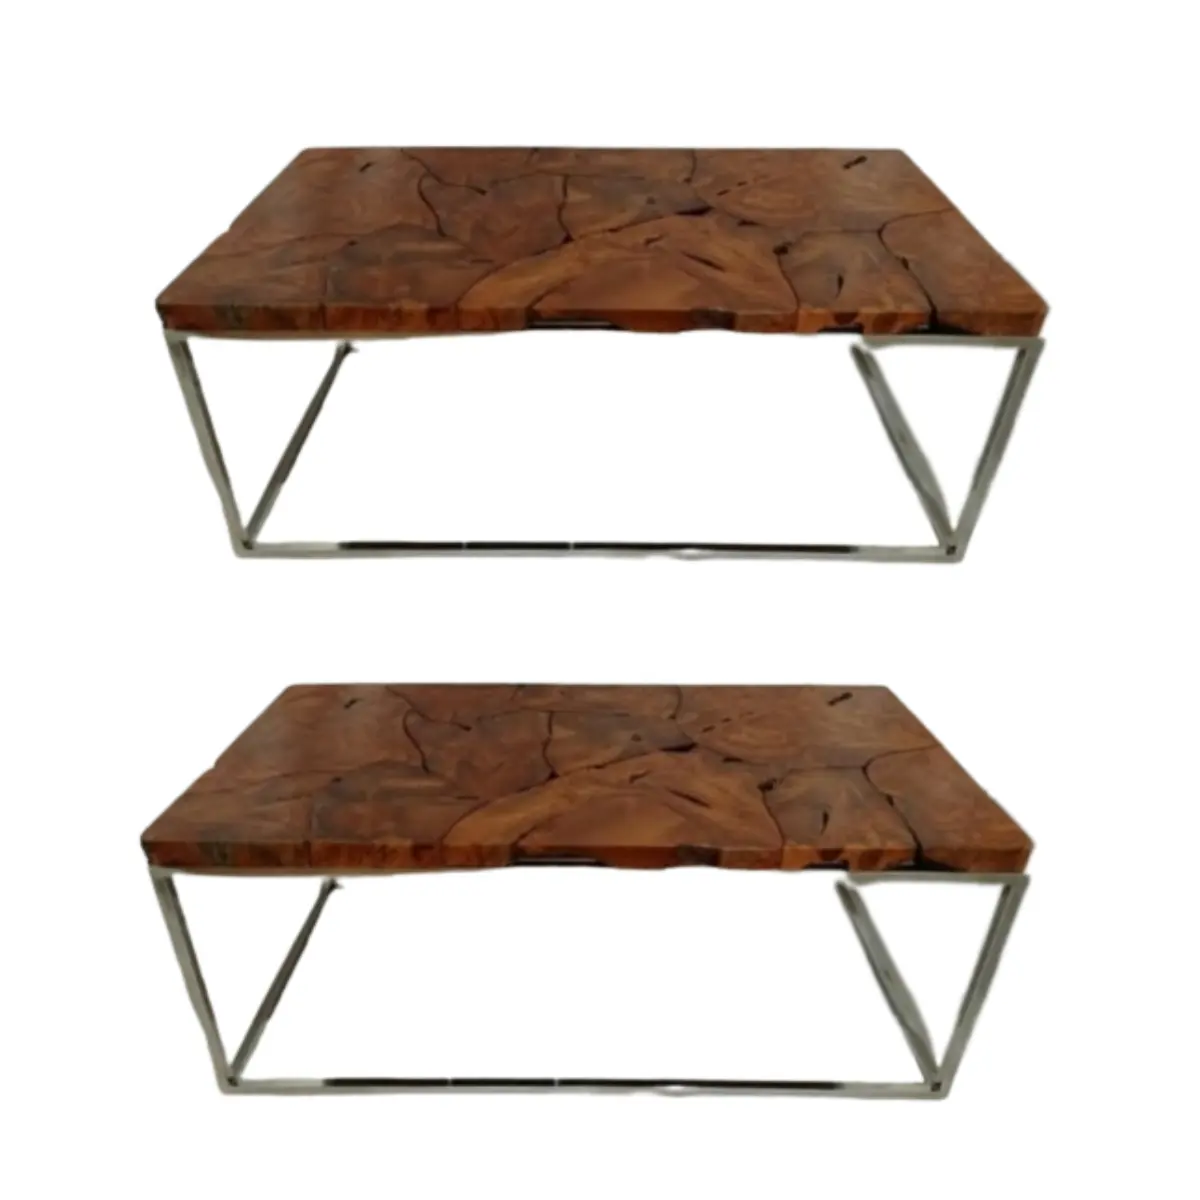 Indonesia Best Table From Compiled By Teak Root With Stainless Steel Legs Best Quality Furniture